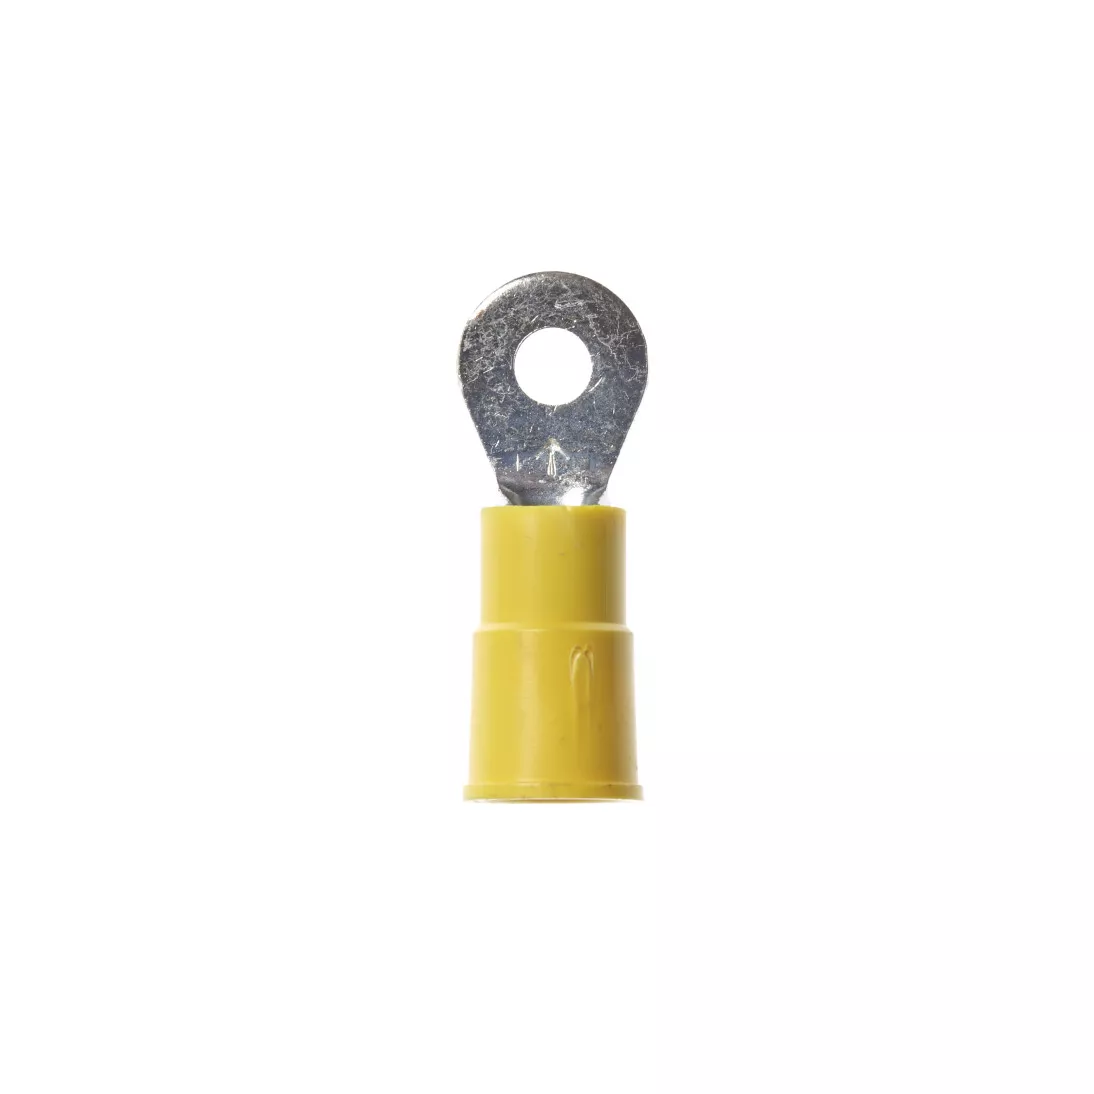 3M™ Scotchlok™ Ring Vinyl Insulated, 50/bottle, MVU10-6RX,
standard-style ring tongue fits around the stud, 500/Case